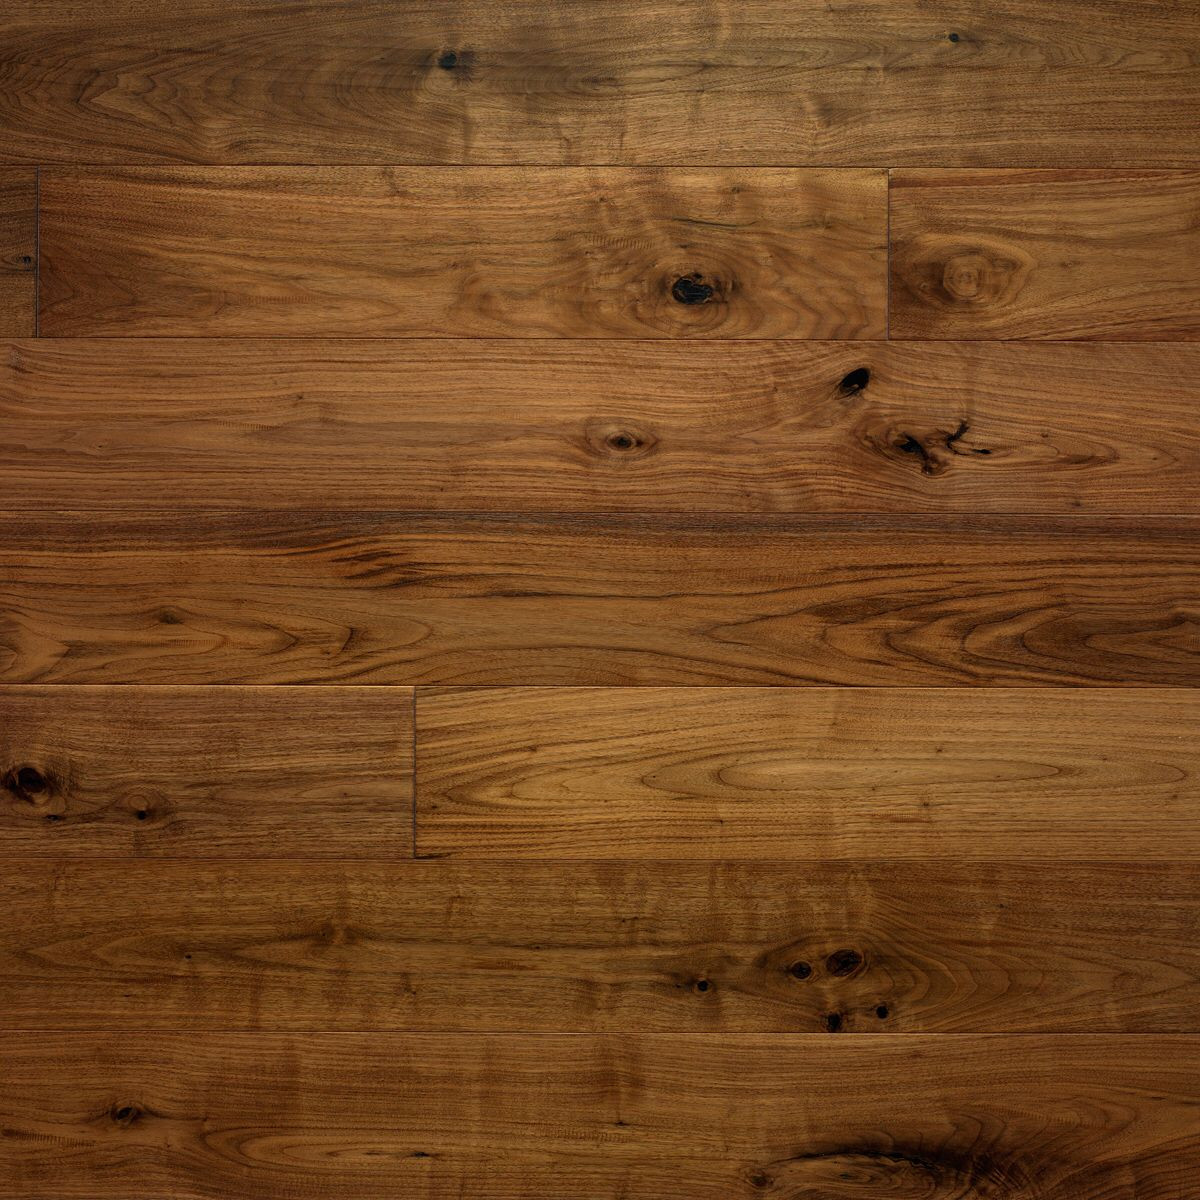 15 Awesome 3 4 Vs 1 2 Inch Engineered Hardwood Flooring 2024 free download 3 4 vs 1 2 inch engineered hardwood flooring of kentwood originals sculpted walnut wide plank engineered hardwood for kentwood originals sculpted walnut wide plank engineered hardwood